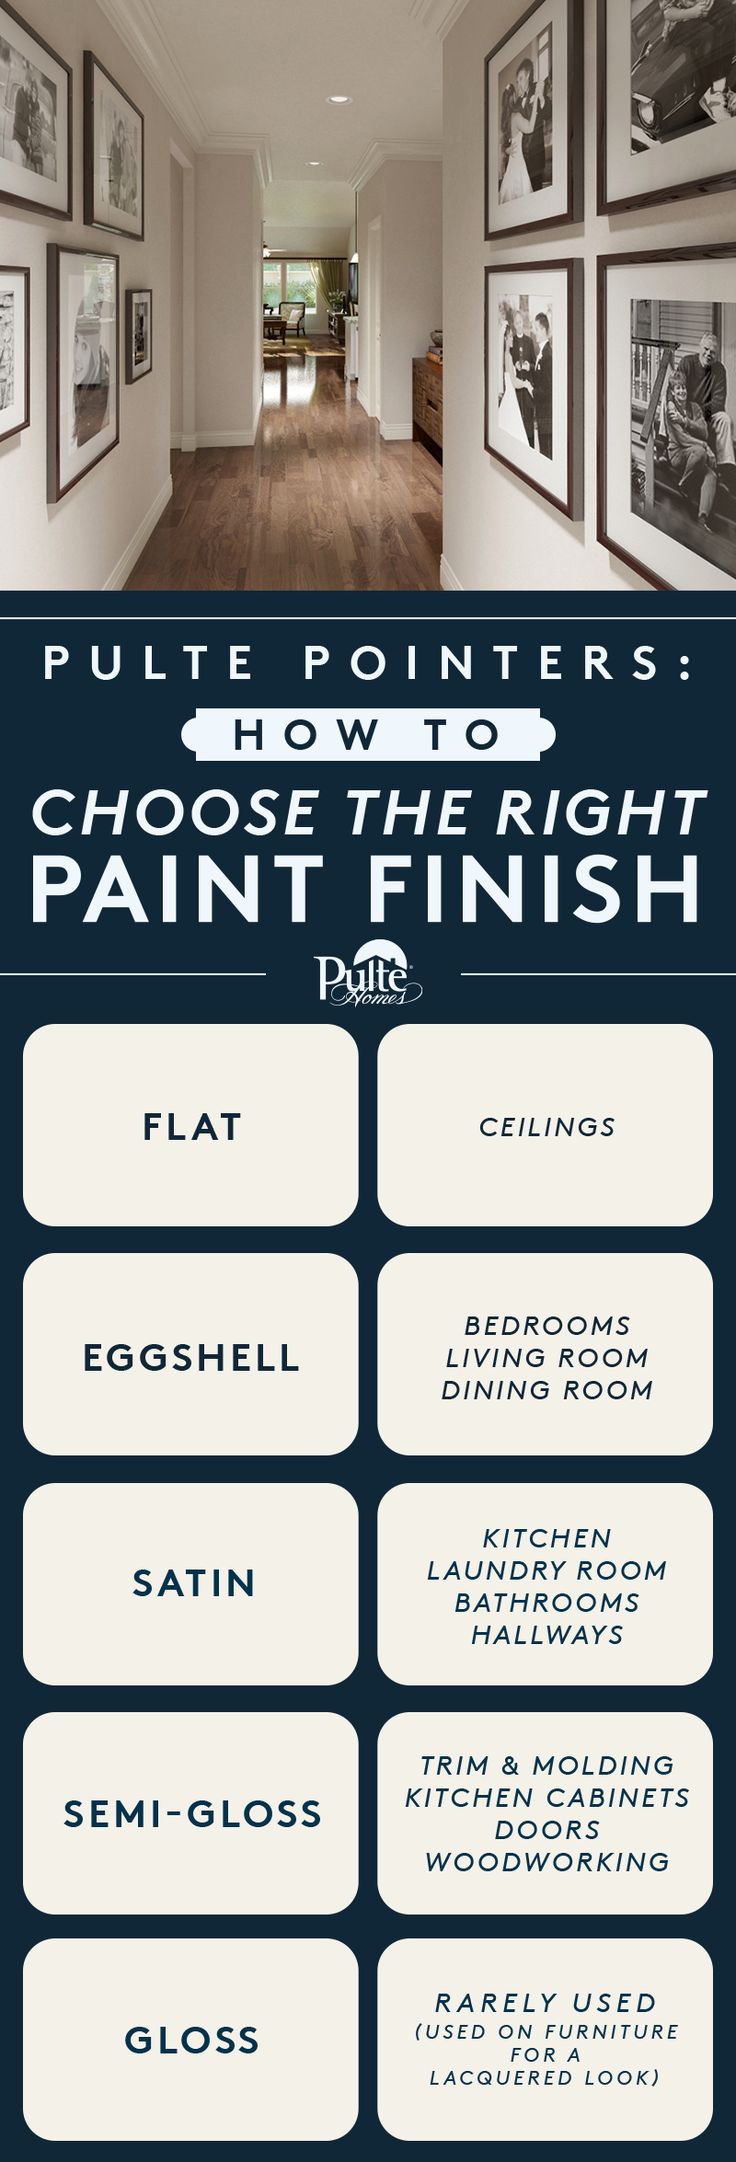 Flat, satin or semi-gloss? These helpful tips will help you choose the right pai...